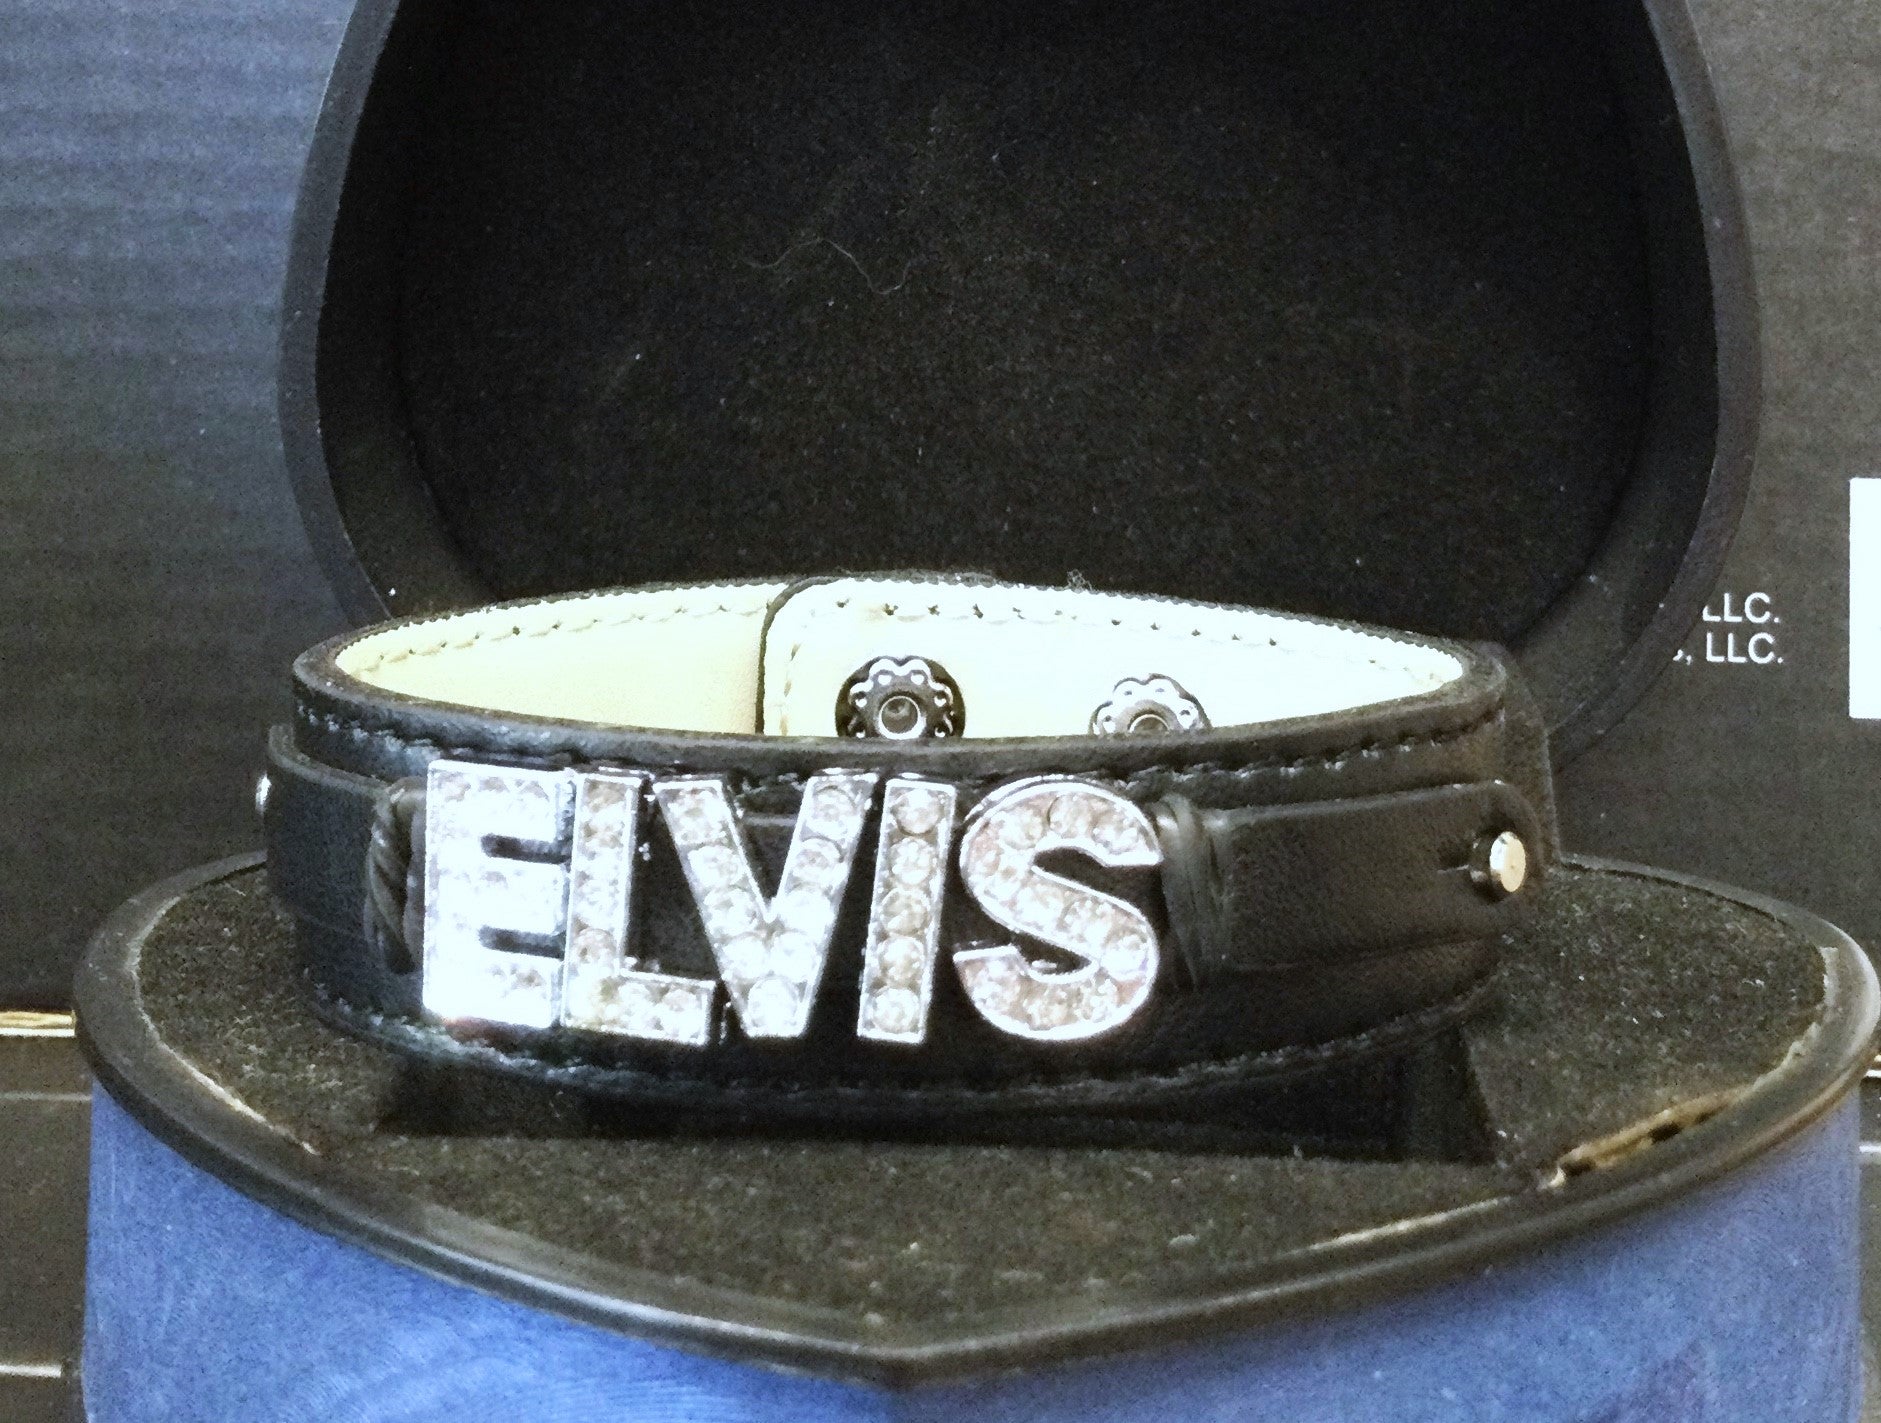 Bracelet with Elvis or TCB in rhinestone letters faux leather cuff